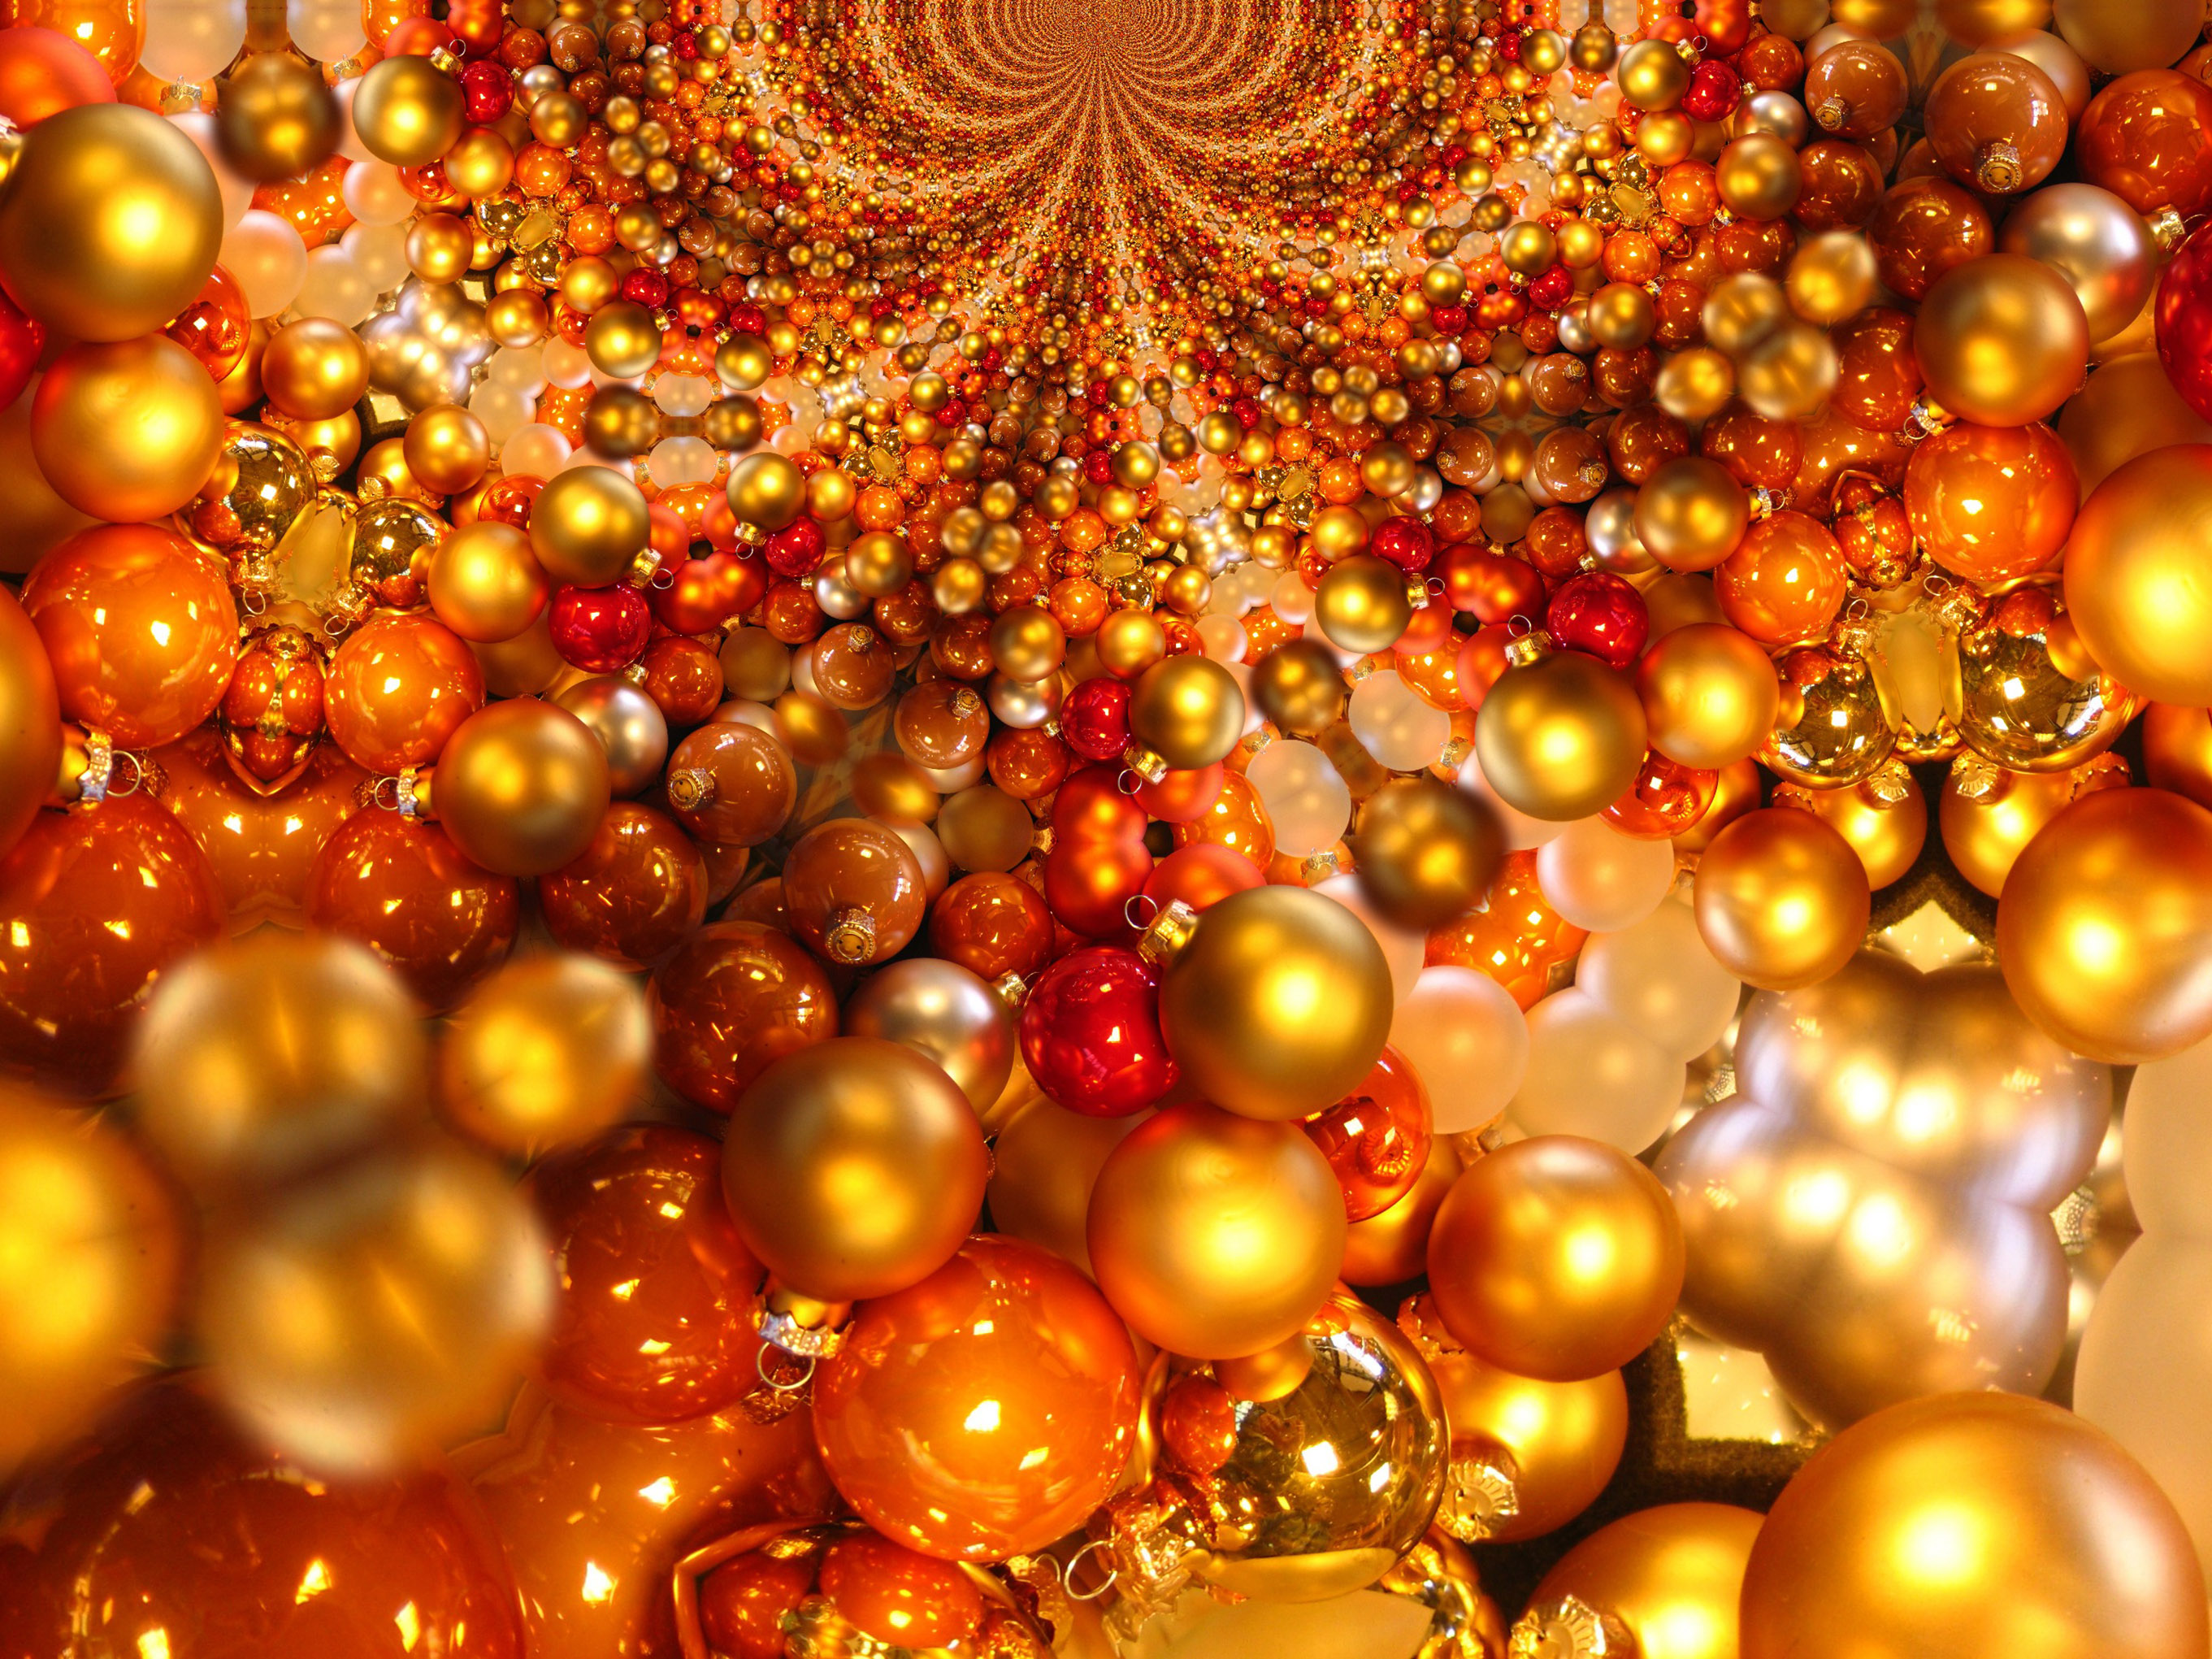 Great Ball or Bauble Themed Free Christmas Wallpaper or